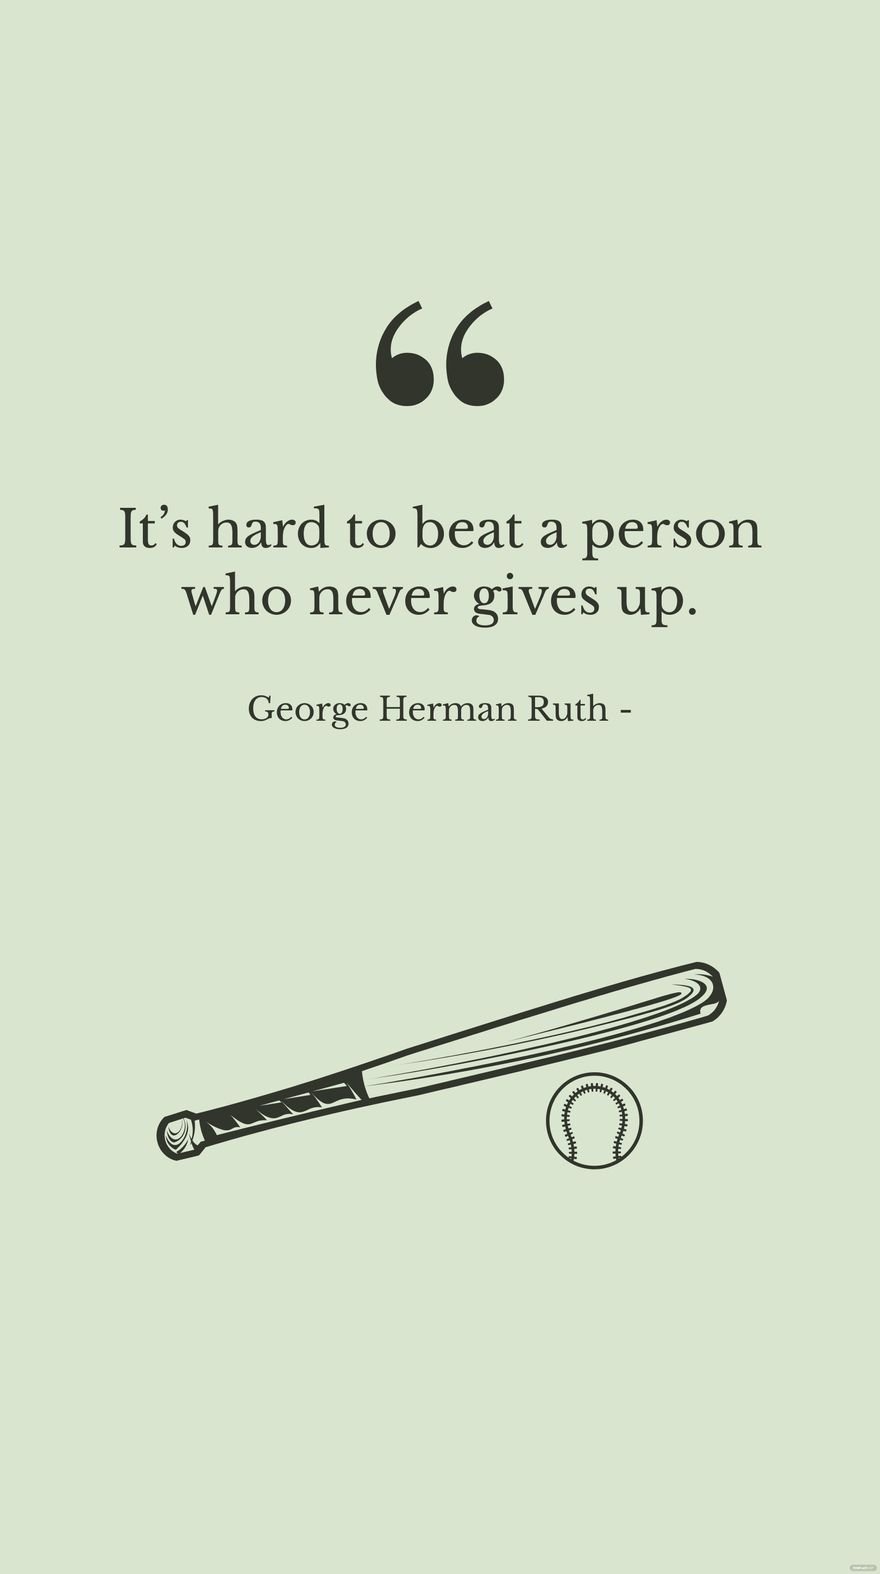 Free George Herman Ruth - It’s hard to beat a person who never gives up. in JPG